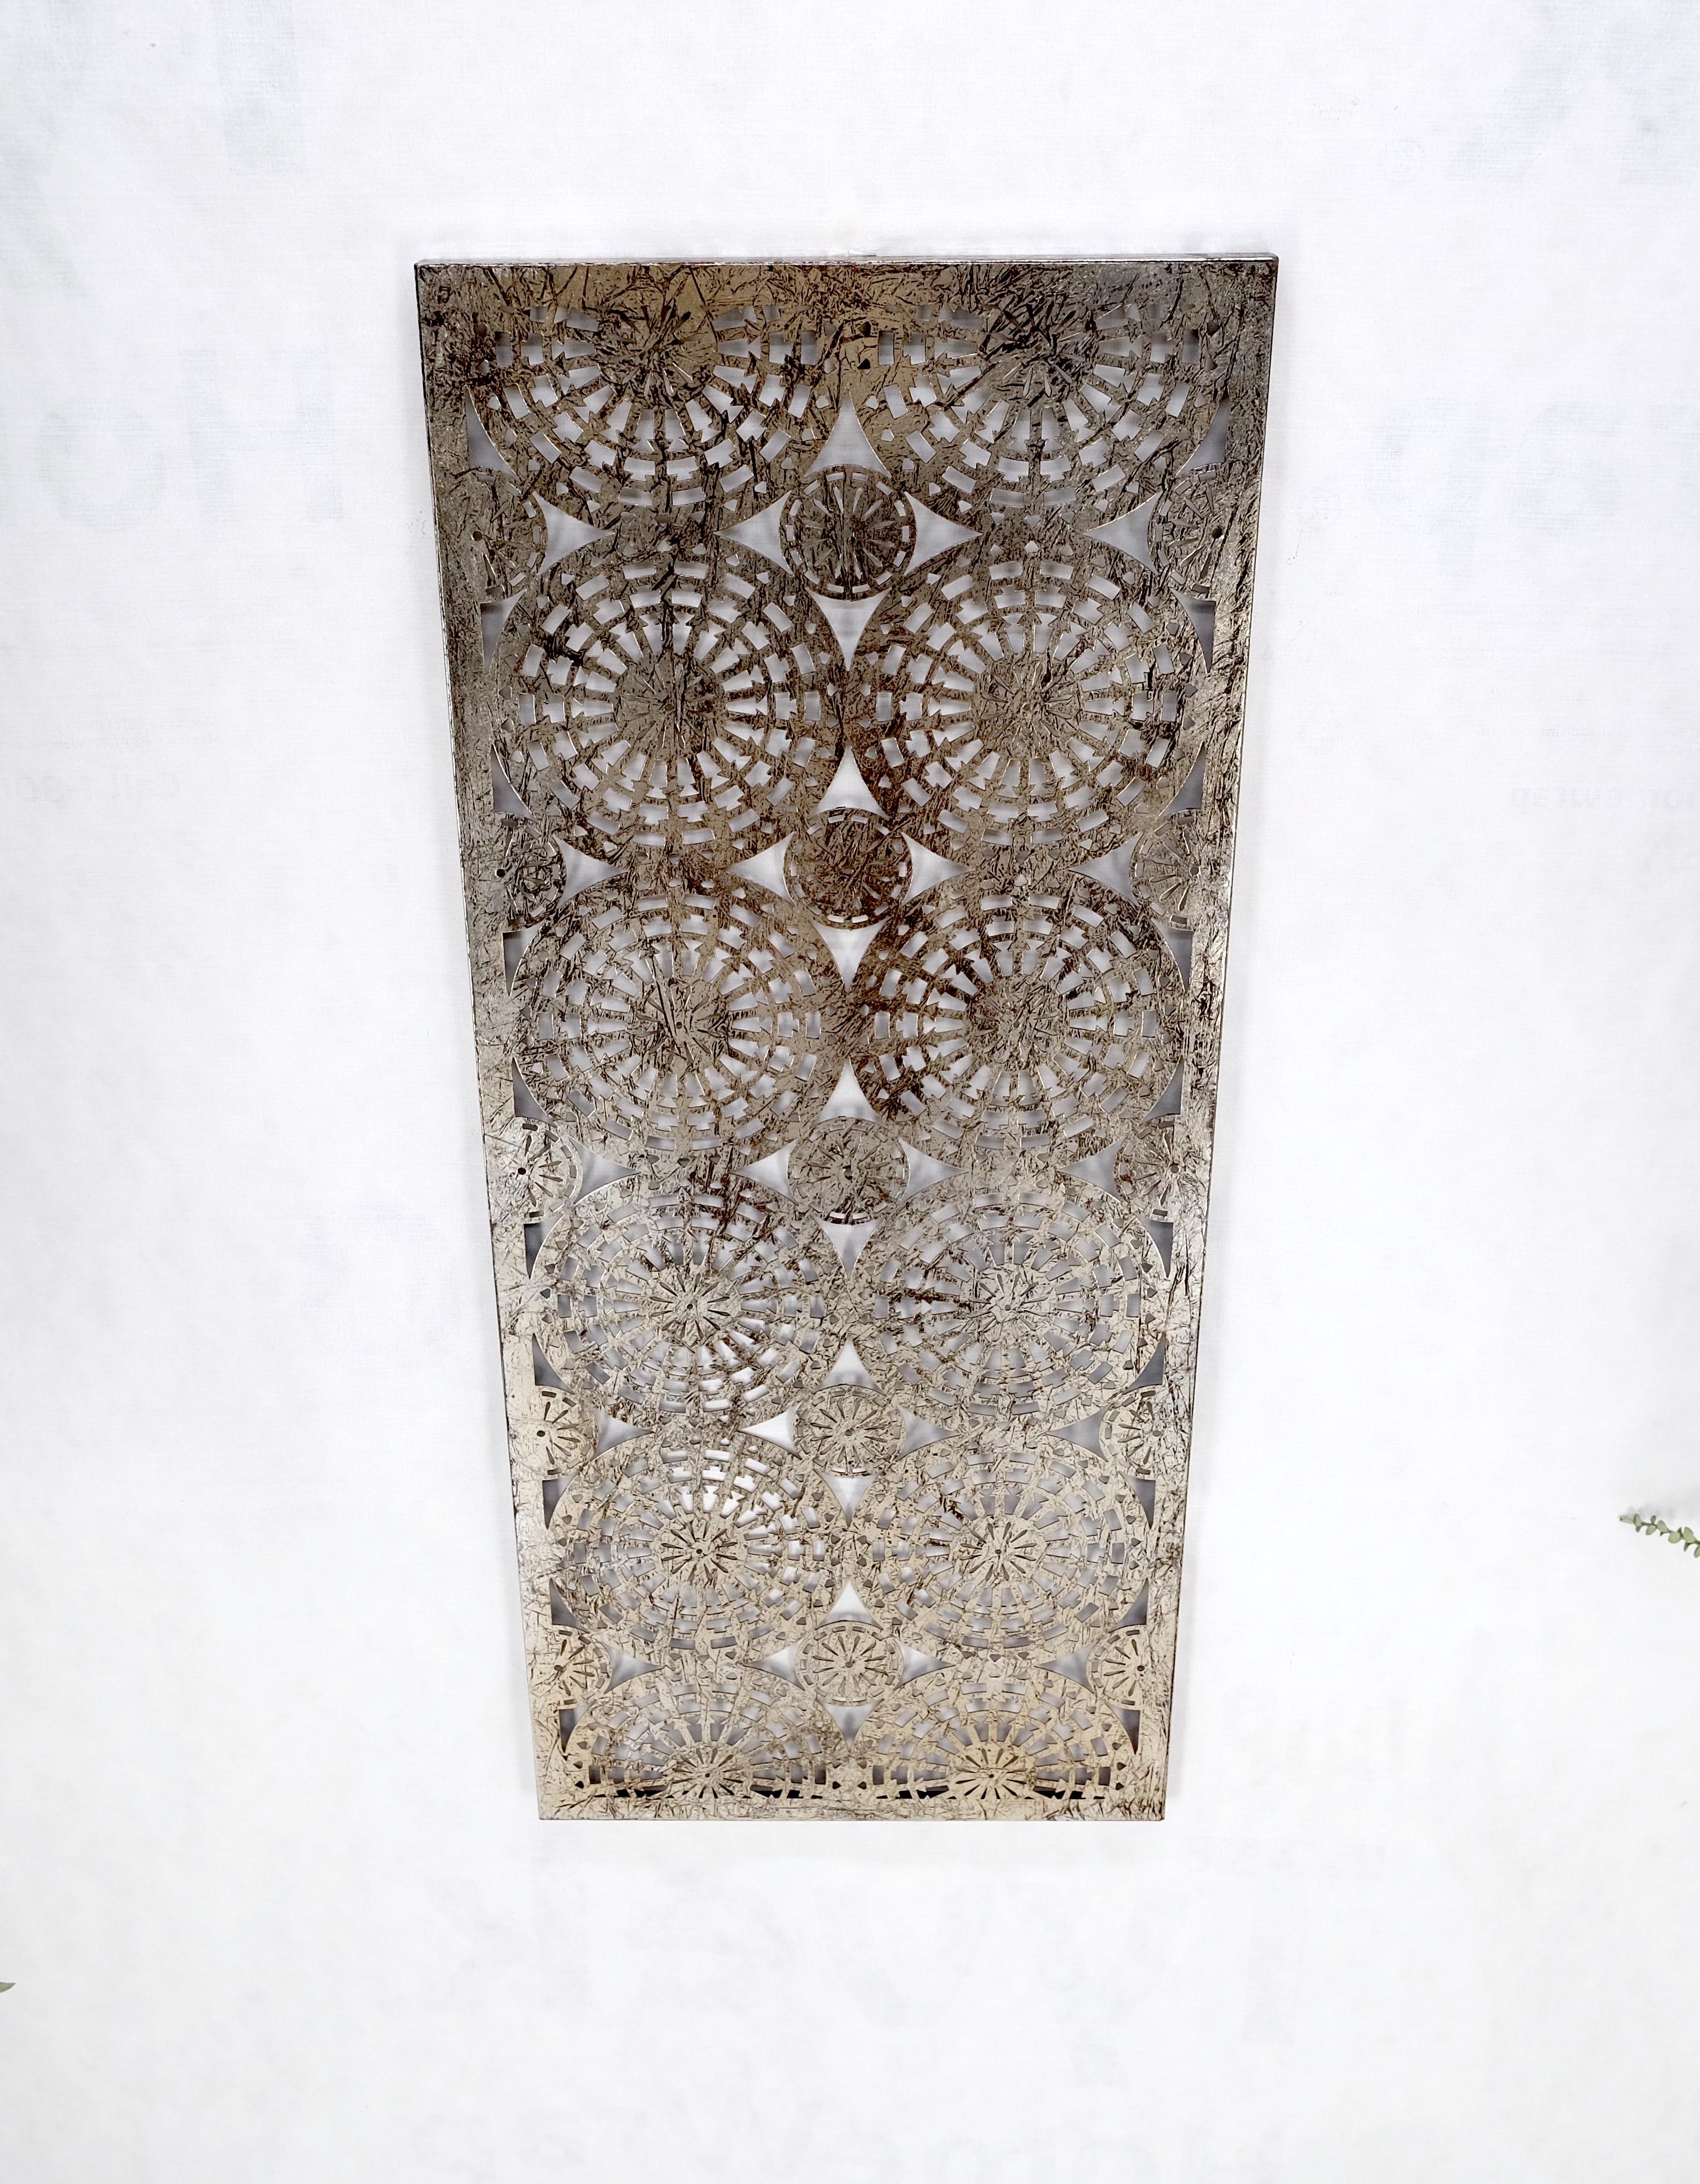 Silvered Geometrical Patterns Silver Gilt Sheet Metal Wall Hanging Sculpture Screen MINT For Sale